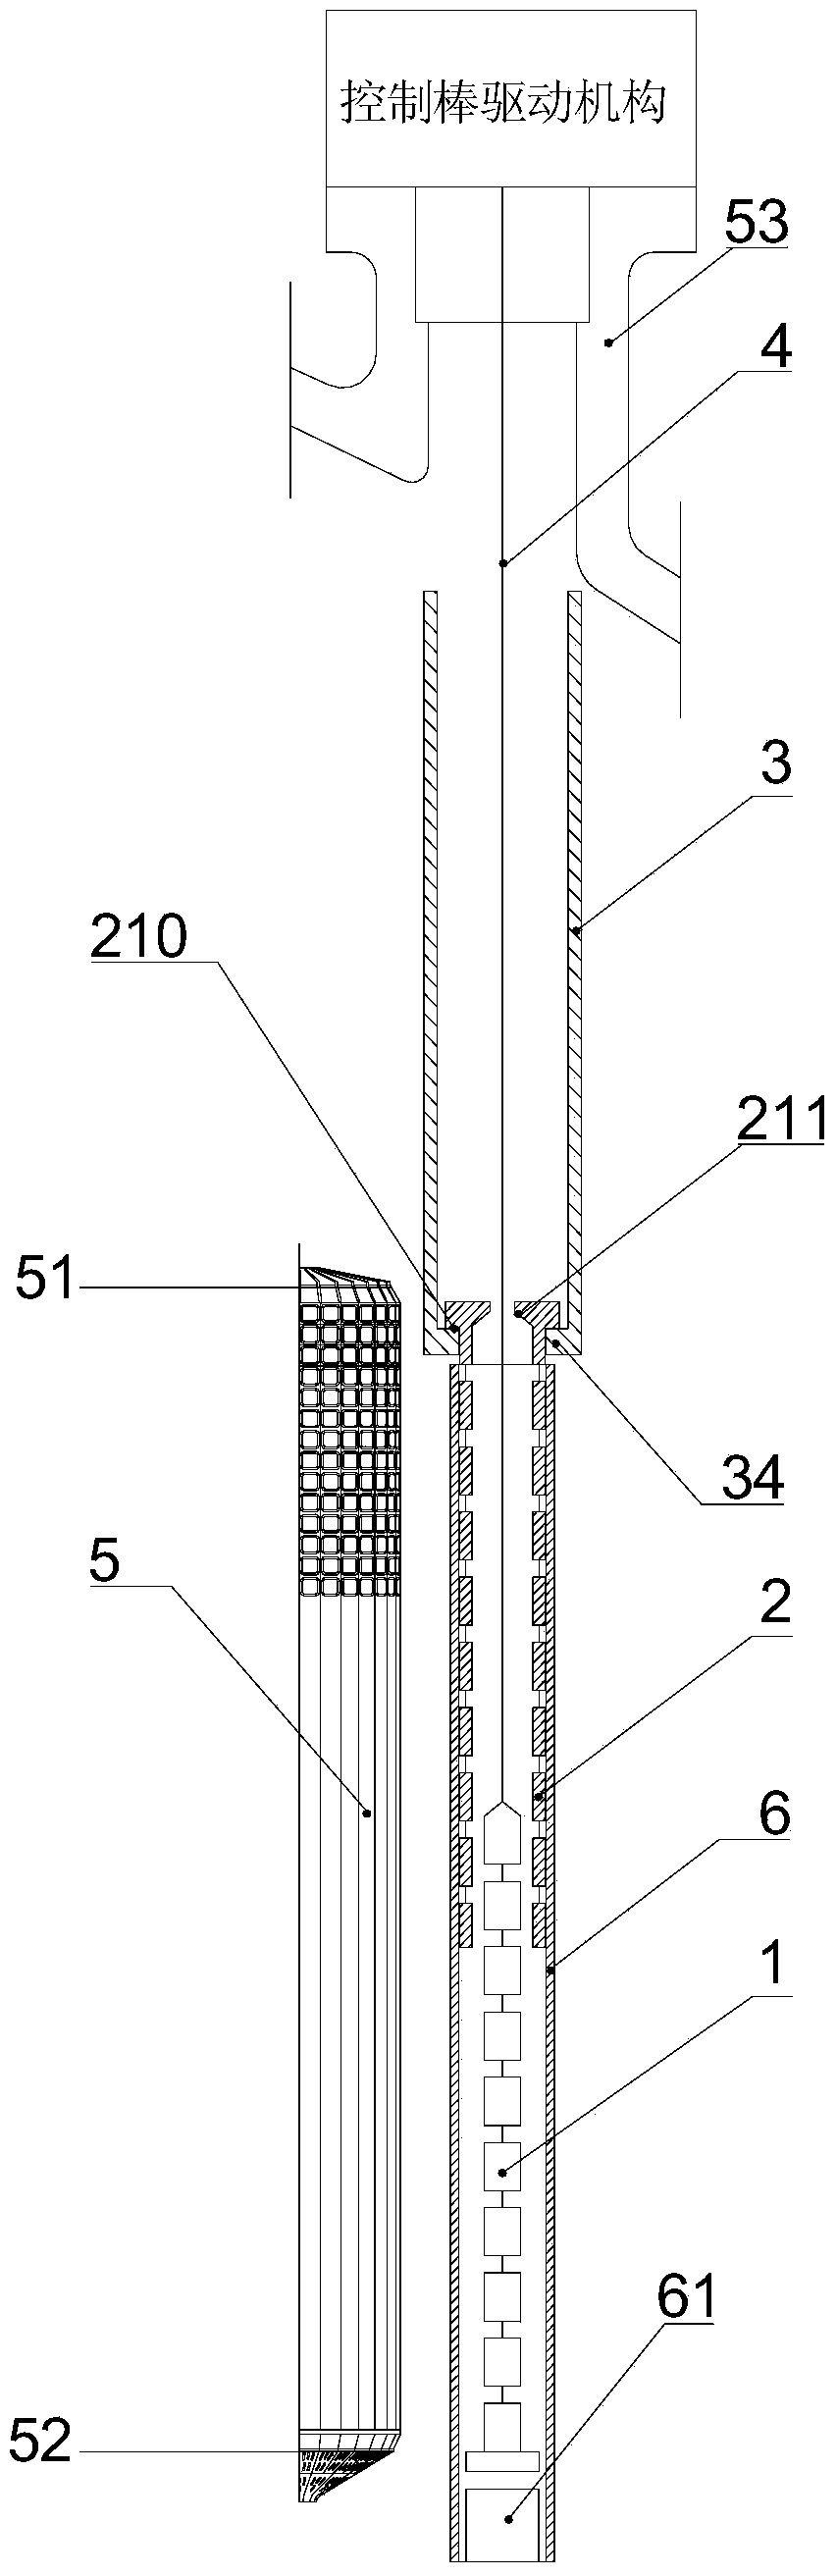 Reactivity control method of pebble-bed high-temperature gas cooled reactor and telescopiform control rod